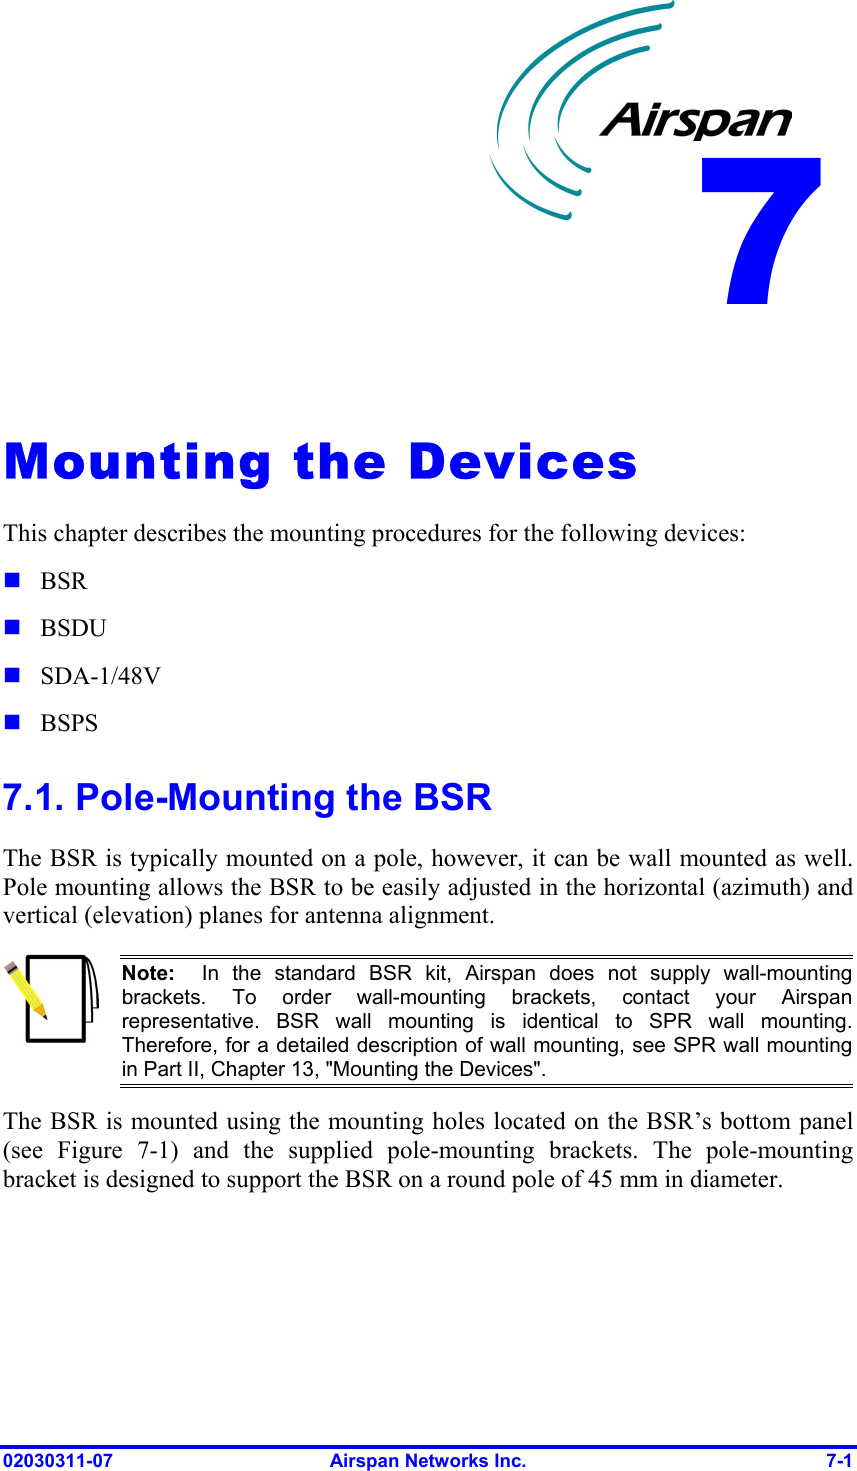  02030311-07  Airspan Networks Inc.  7-1   Mounting the Devices This chapter describes the mounting procedures for the following devices:  BSR  BSDU  SDA-1/48V  BSPS 7.1. Pole-Mounting the BSR The BSR is typically mounted on a pole, however, it can be wall mounted as well. Pole mounting allows the BSR to be easily adjusted in the horizontal (azimuth) and vertical (elevation) planes for antenna alignment.   Note:  In the standard BSR kit, Airspan does not supply wall-mounting brackets. To order wall-mounting brackets, contact your Airspan representative. BSR wall mounting is identical to SPR wall mounting.Therefore, for a detailed description of wall mounting, see SPR wall mountingin Part II, Chapter 13, &quot;Mounting the Devices&quot;. The BSR is mounted using the mounting holes located on the BSR’s bottom panel (see Figure  7-1) and the supplied pole-mounting brackets. The pole-mounting bracket is designed to support the BSR on a round pole of 45 mm in diameter. 7 